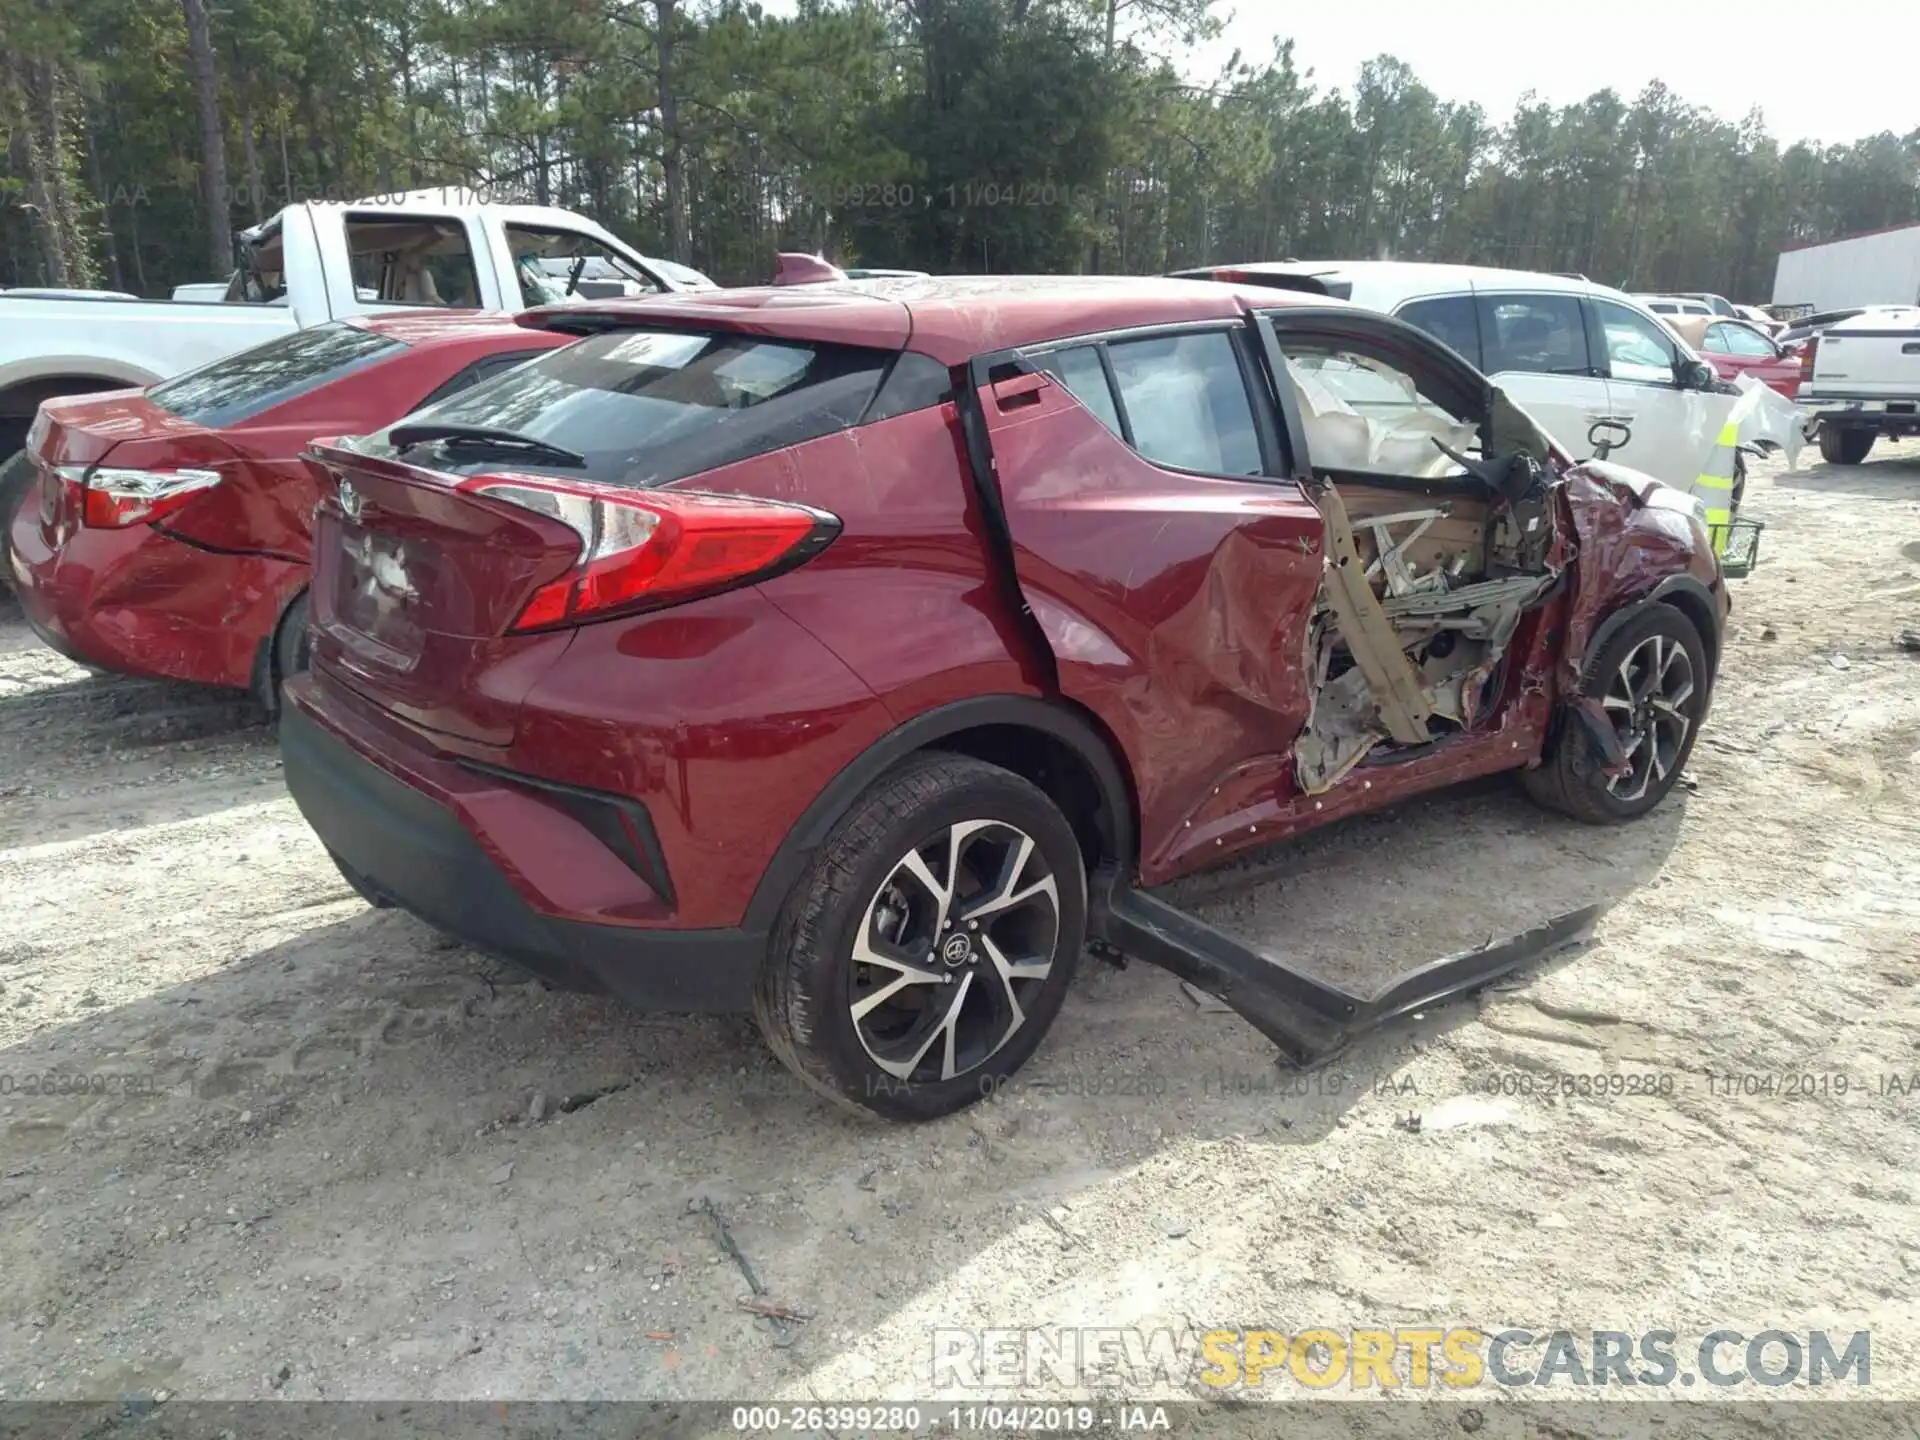 4 Photograph of a damaged car NMTKHMBXXKR075709 TOYOTA C-HR 2019